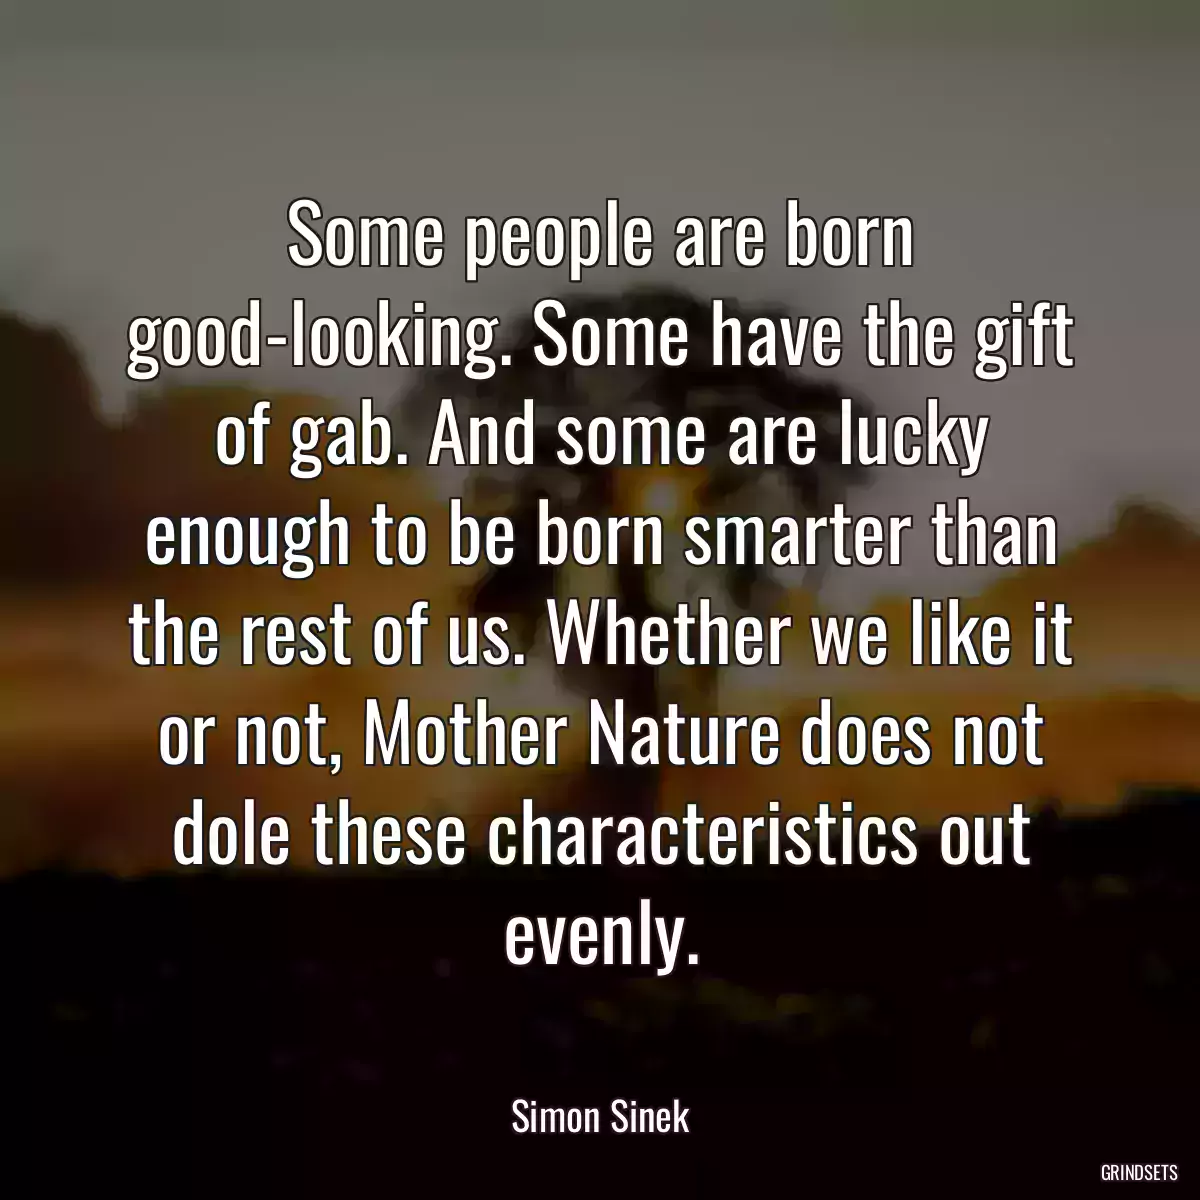 Some people are born good-looking. Some have the gift of gab. And some are lucky enough to be born smarter than the rest of us. Whether we like it or not, Mother Nature does not dole these characteristics out evenly.